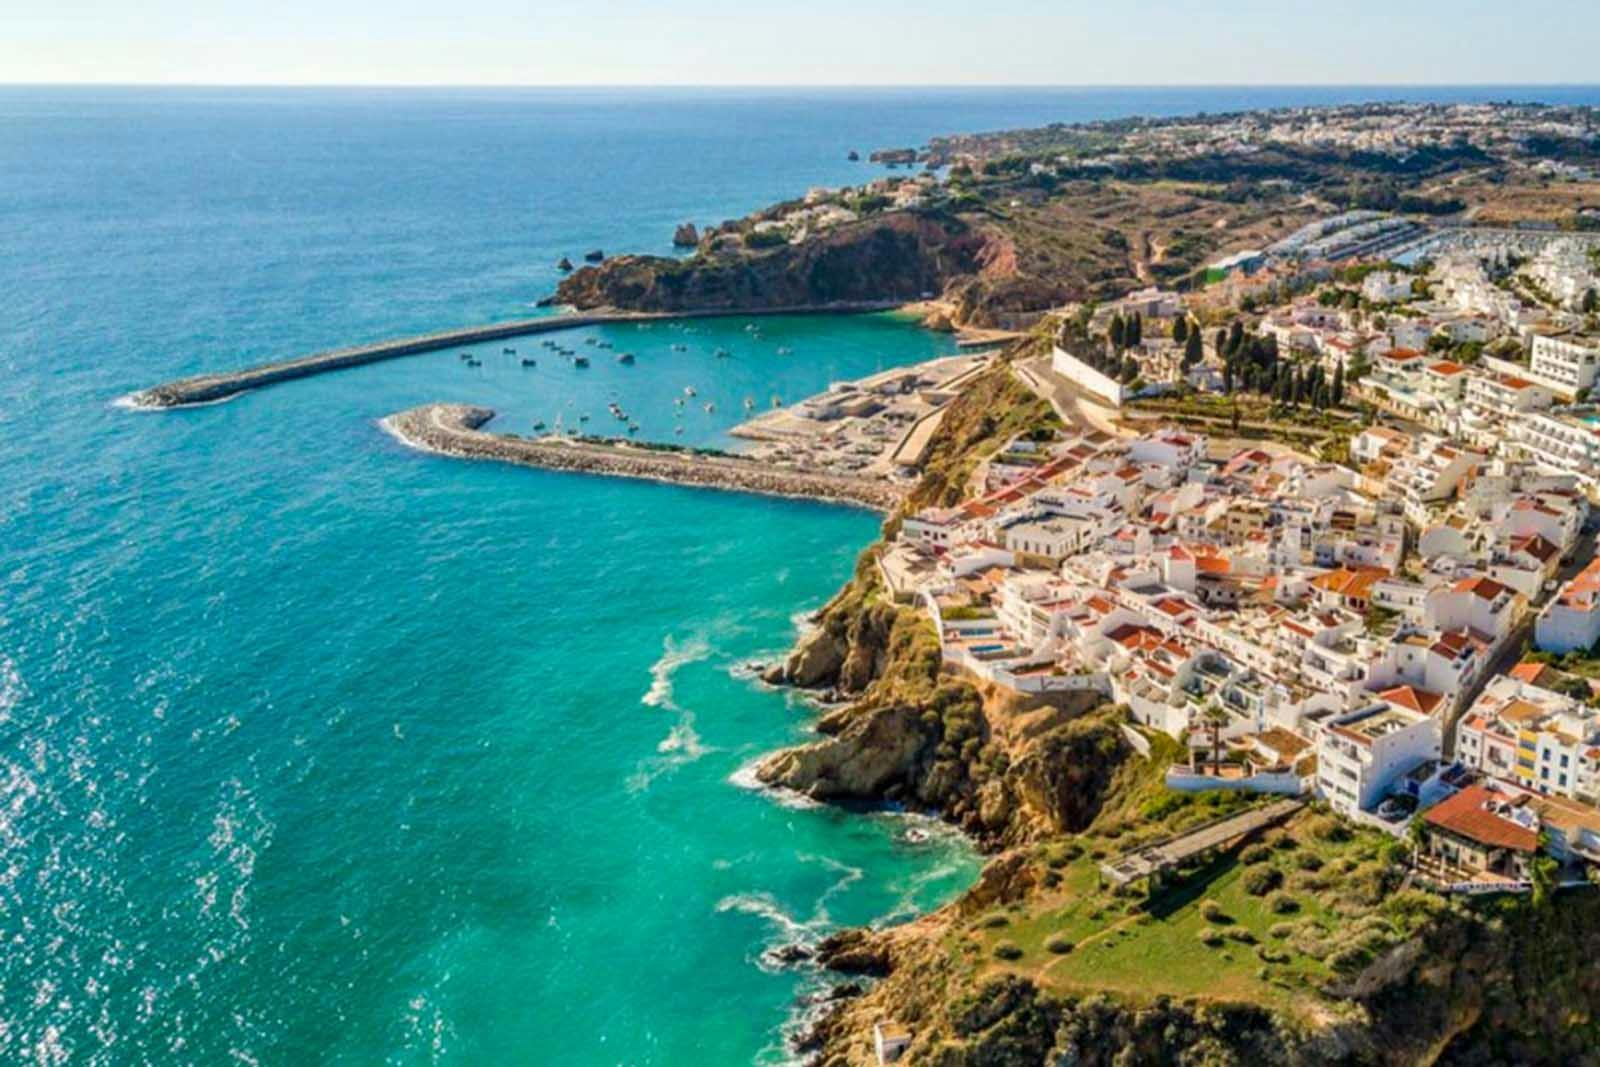 Lagos in the Algarve is one of Portugal's best cities to visit.